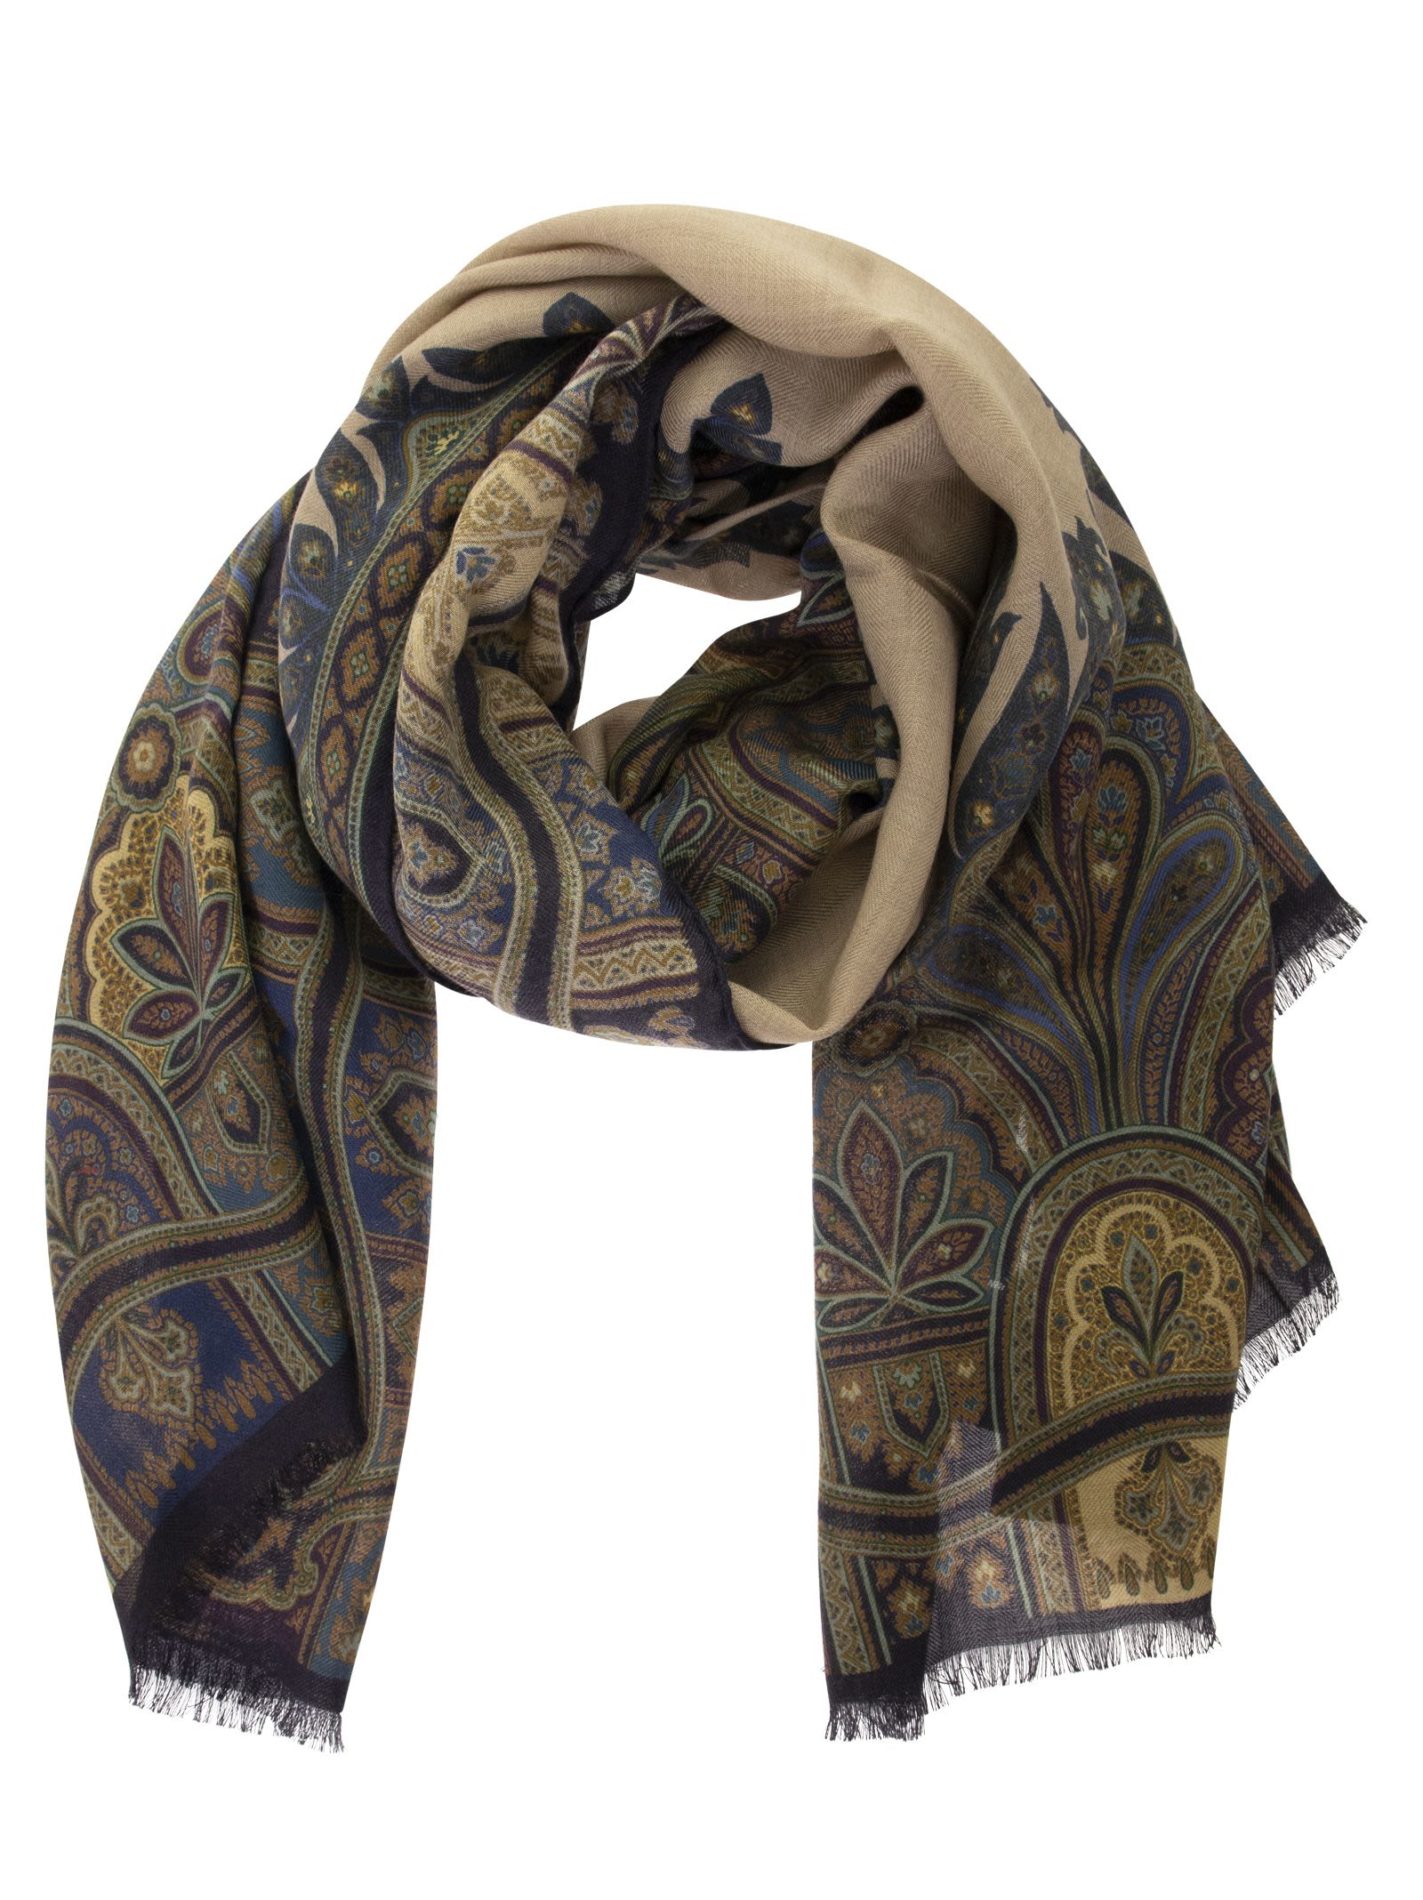 Silk and Cashmere Scarf with Paisley Patterns - Bellettini.com